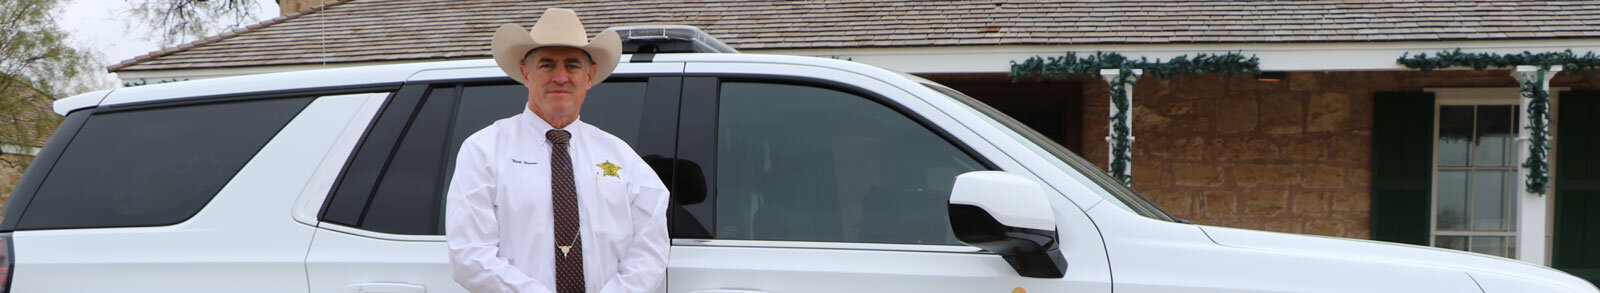 Tom Green County Sheriff Nick Hanna standing in front of Sheriffs Office Vehicle